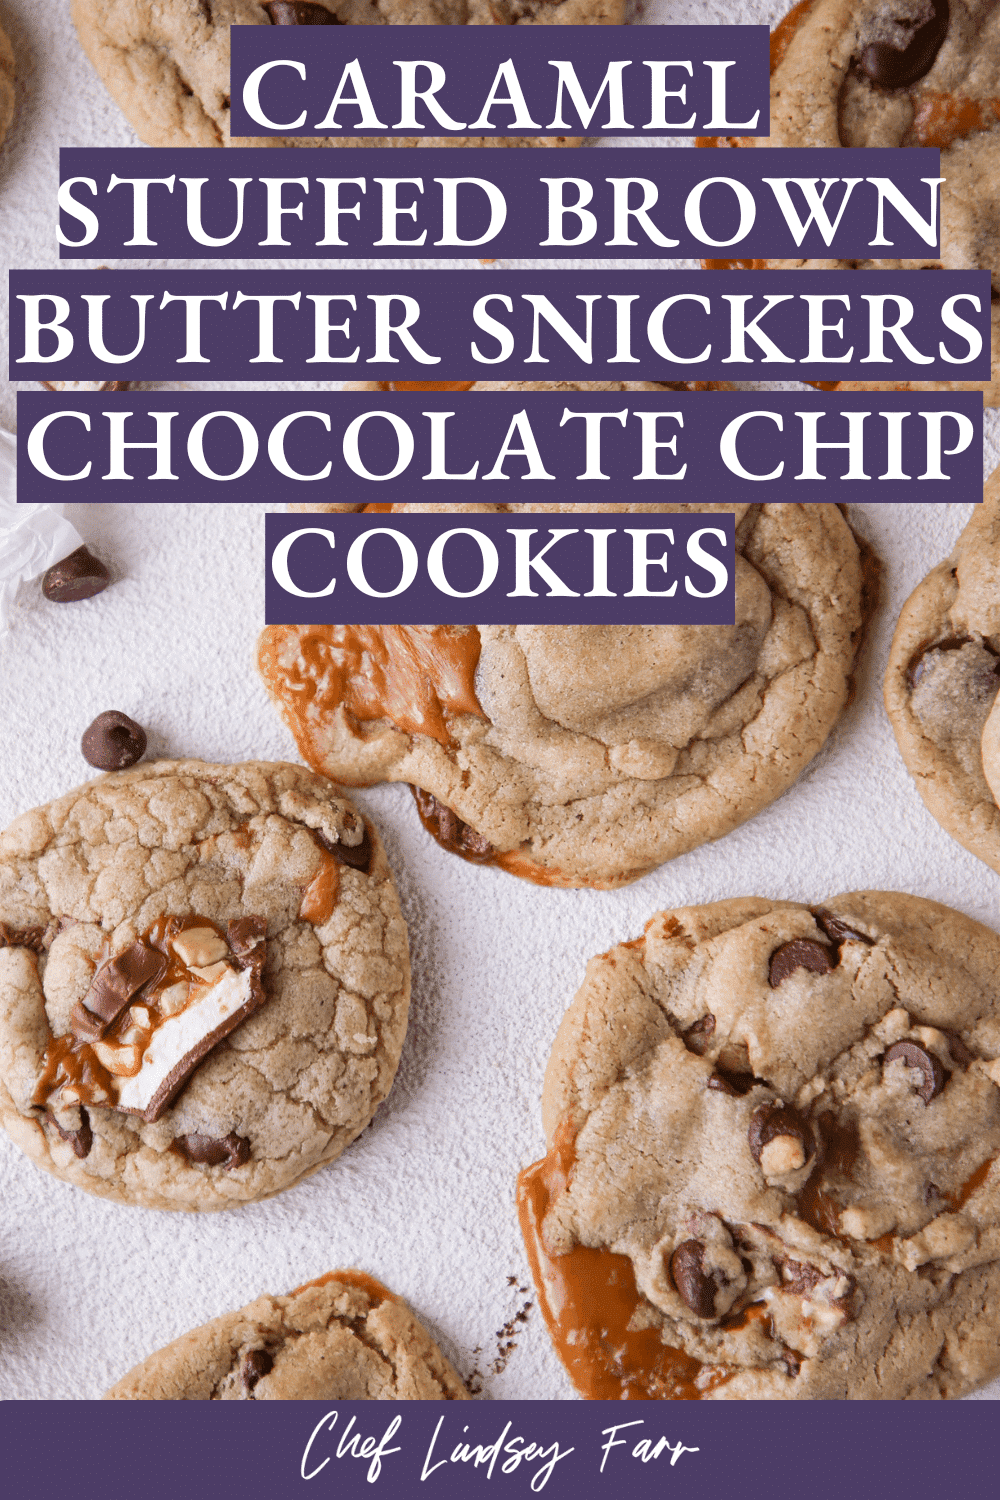 Caramel Stuffed Brown Butter Snickers Chocolate Chip Cookies Bright